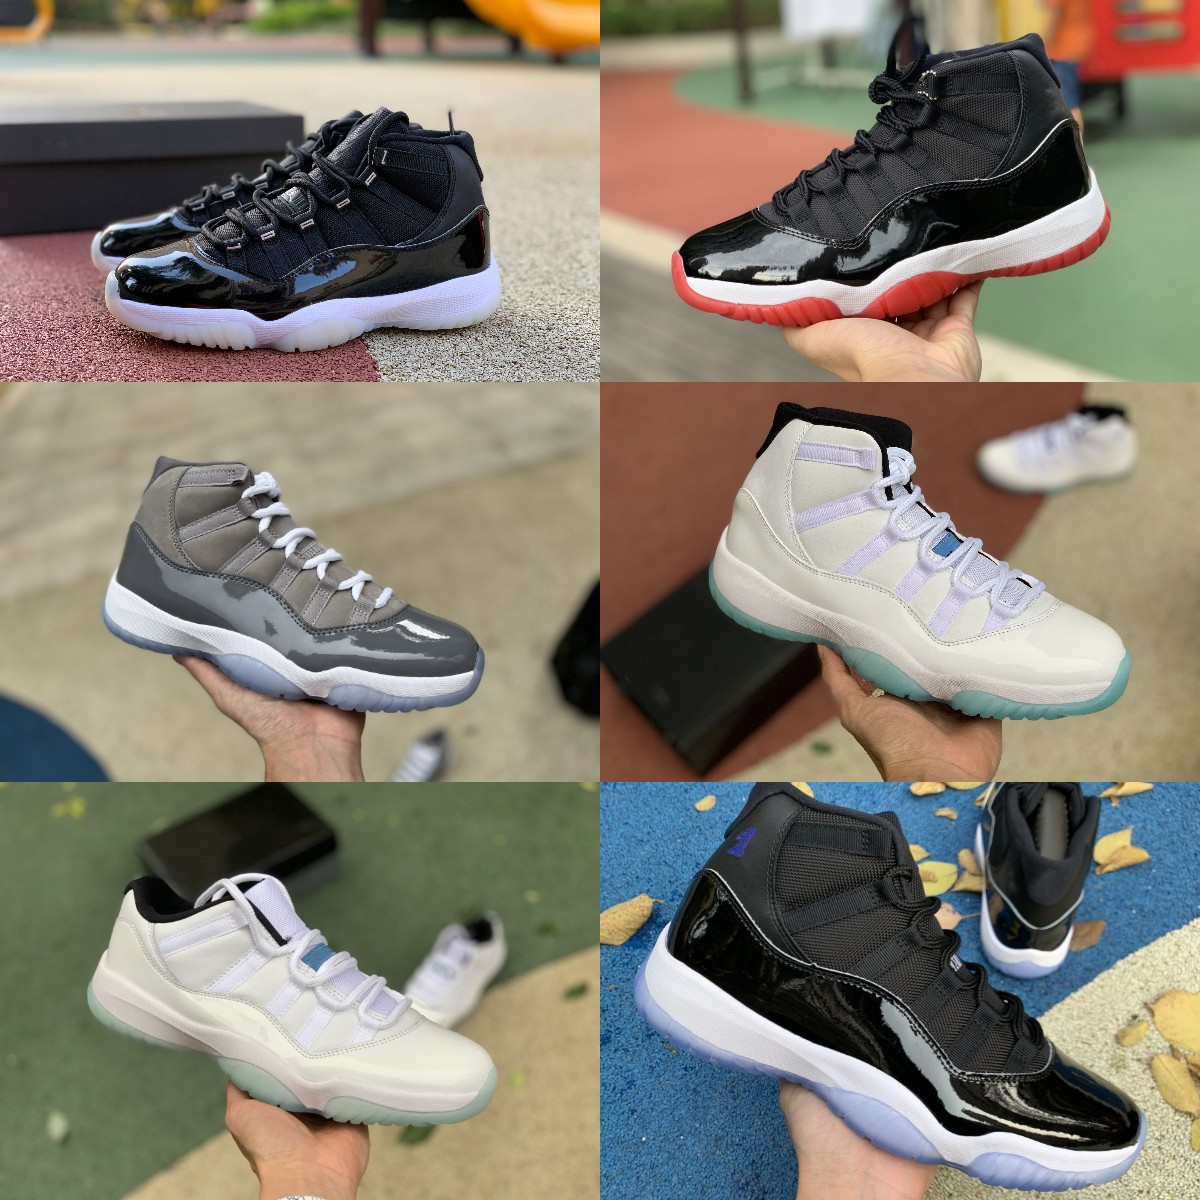 

Jumpman Jubilee 11 11s High Basketball Shoes Barons COOL GREY Legend Blue Playoffs Bred Space Jam Gamma Blue Easter Concord 45 Low Columbia White Red Sneakers S6, Please contact us